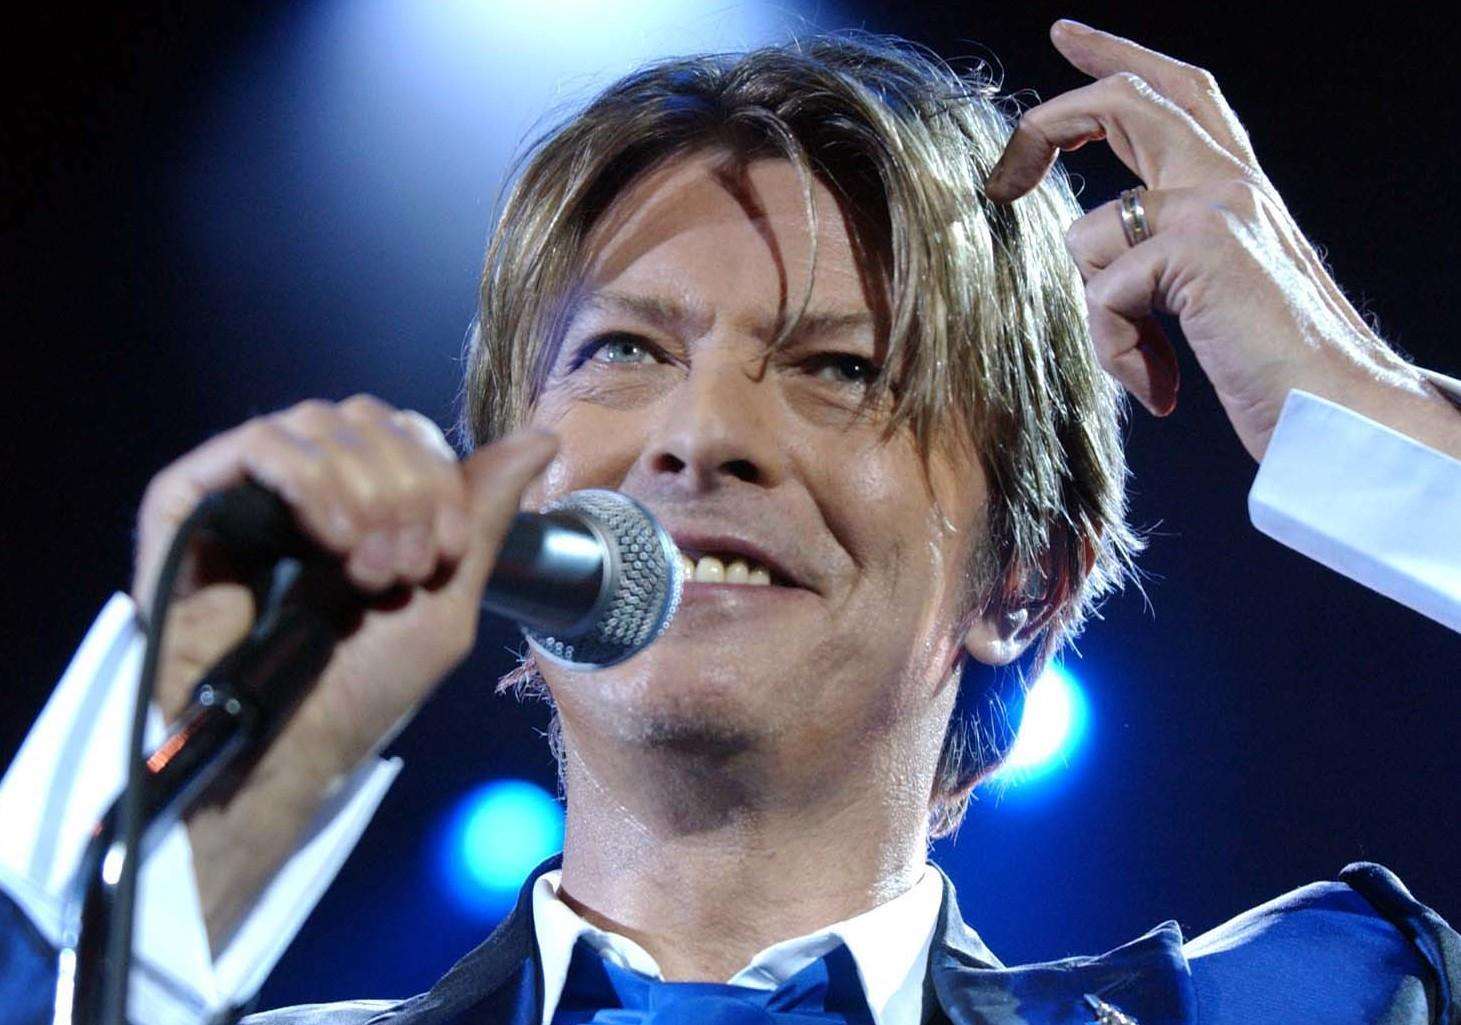 David Bowie lived in Maidstone for a short time in his youth - as well as performing in the town